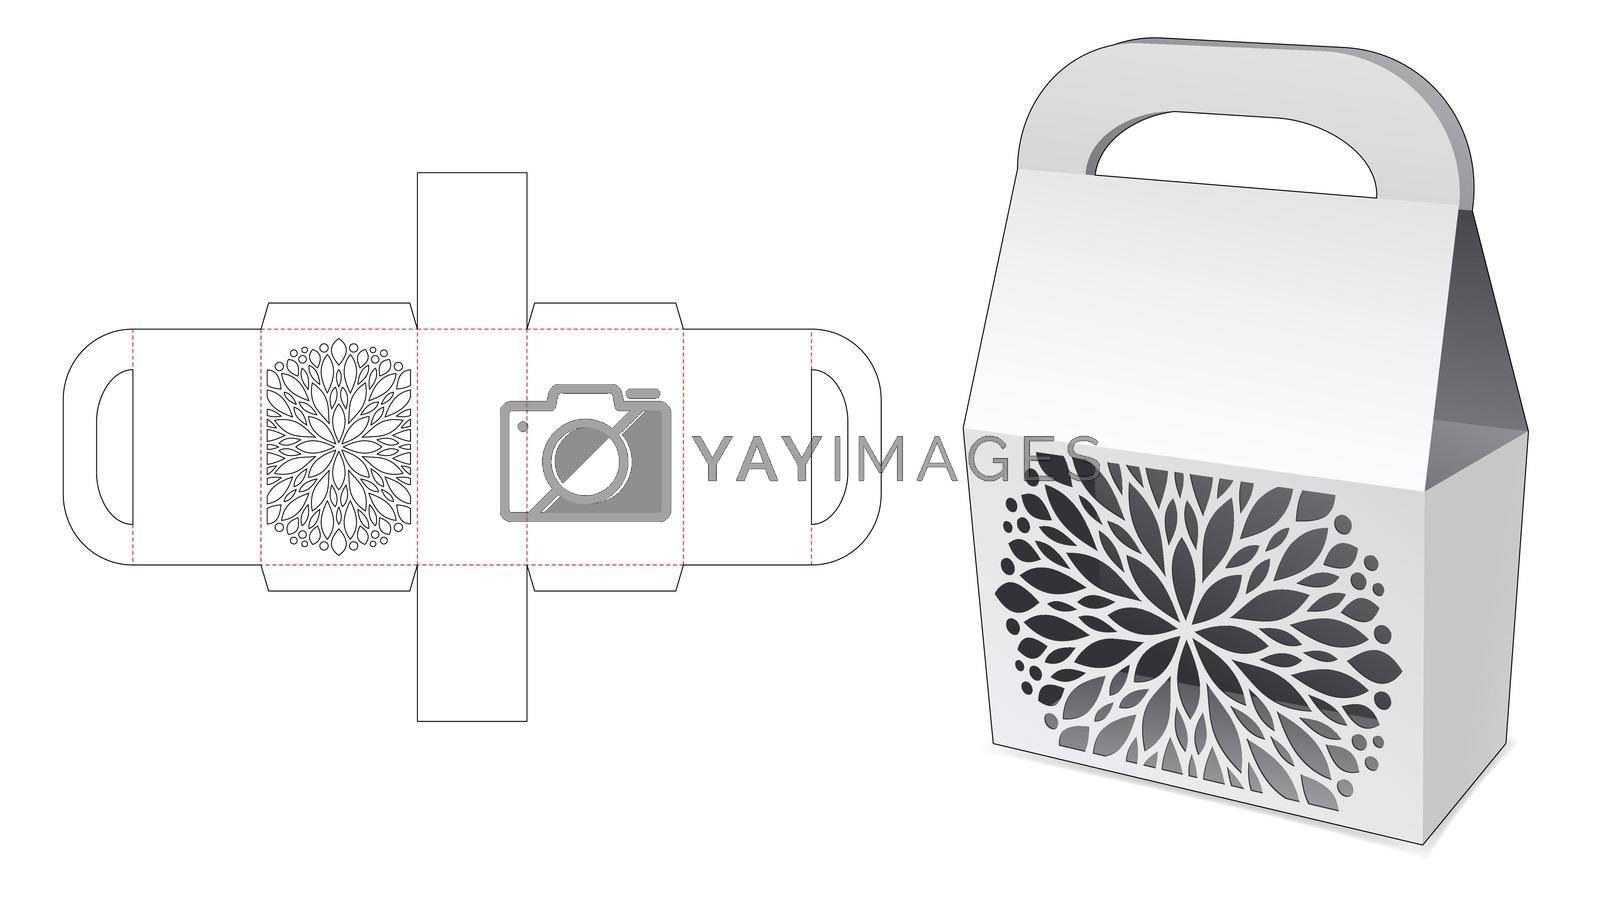 Royalty free image of Bag box with stenciled mandala die cut template by valueinvestor